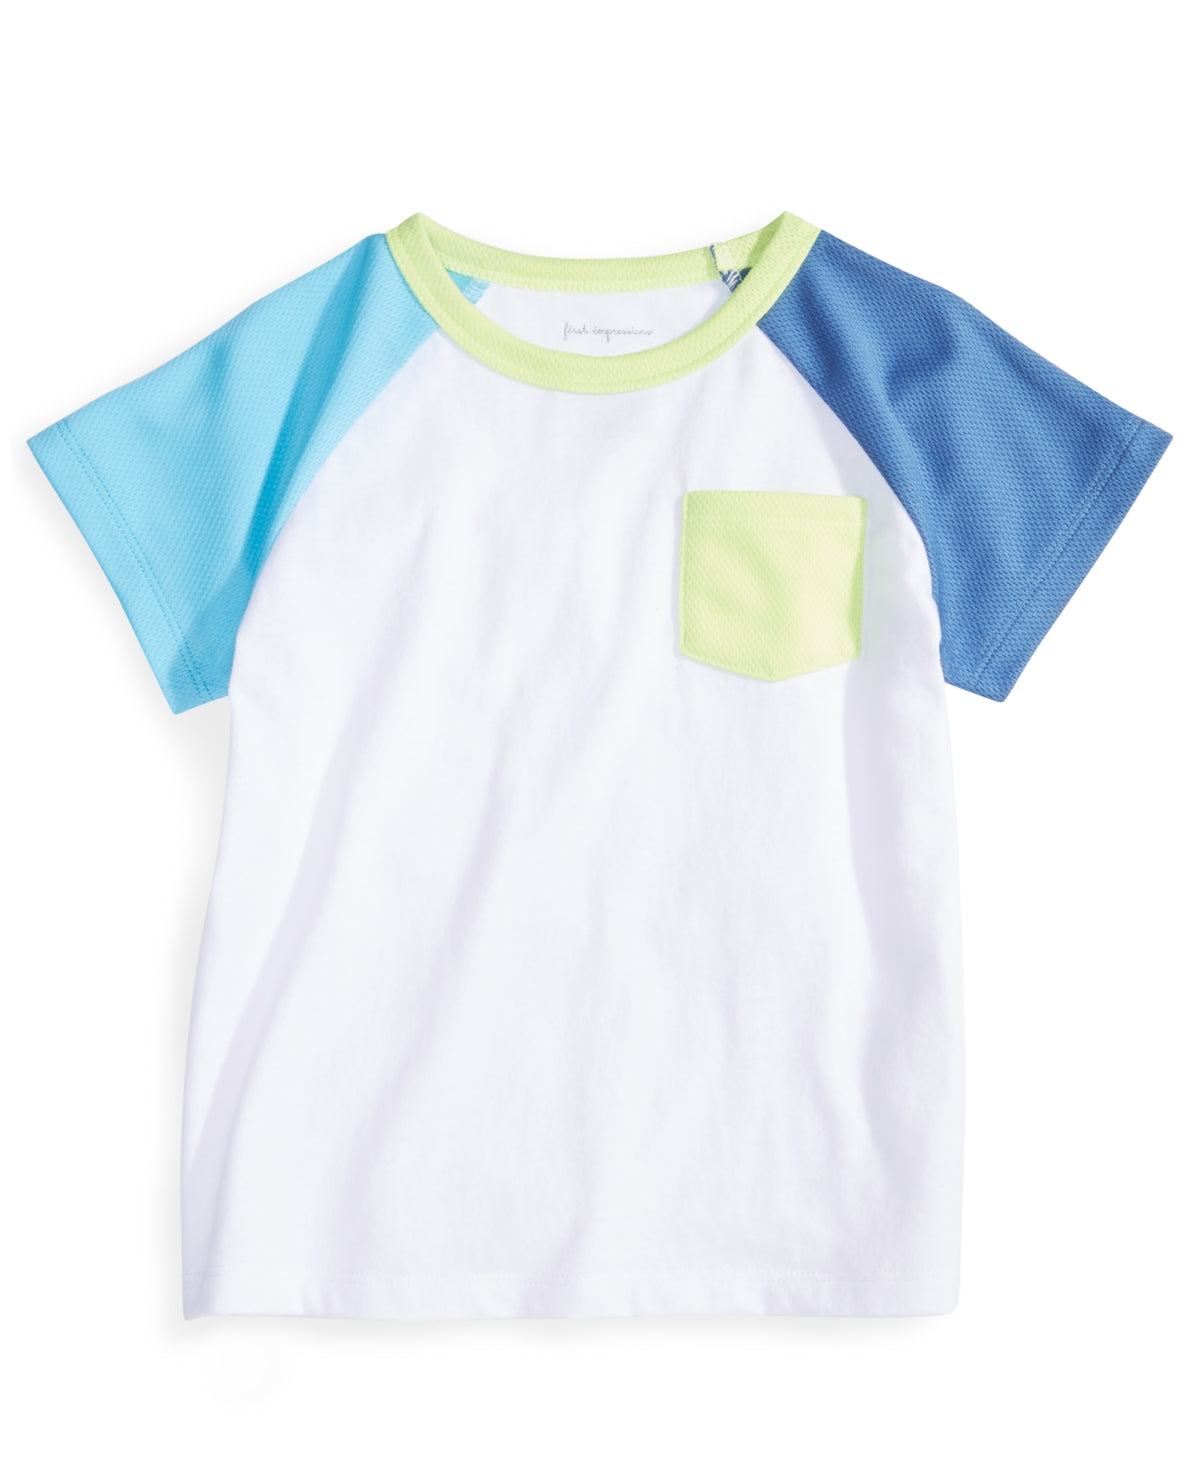 First Impressions Baby Boys Colorblocked T-Shirt Bright White 24 months